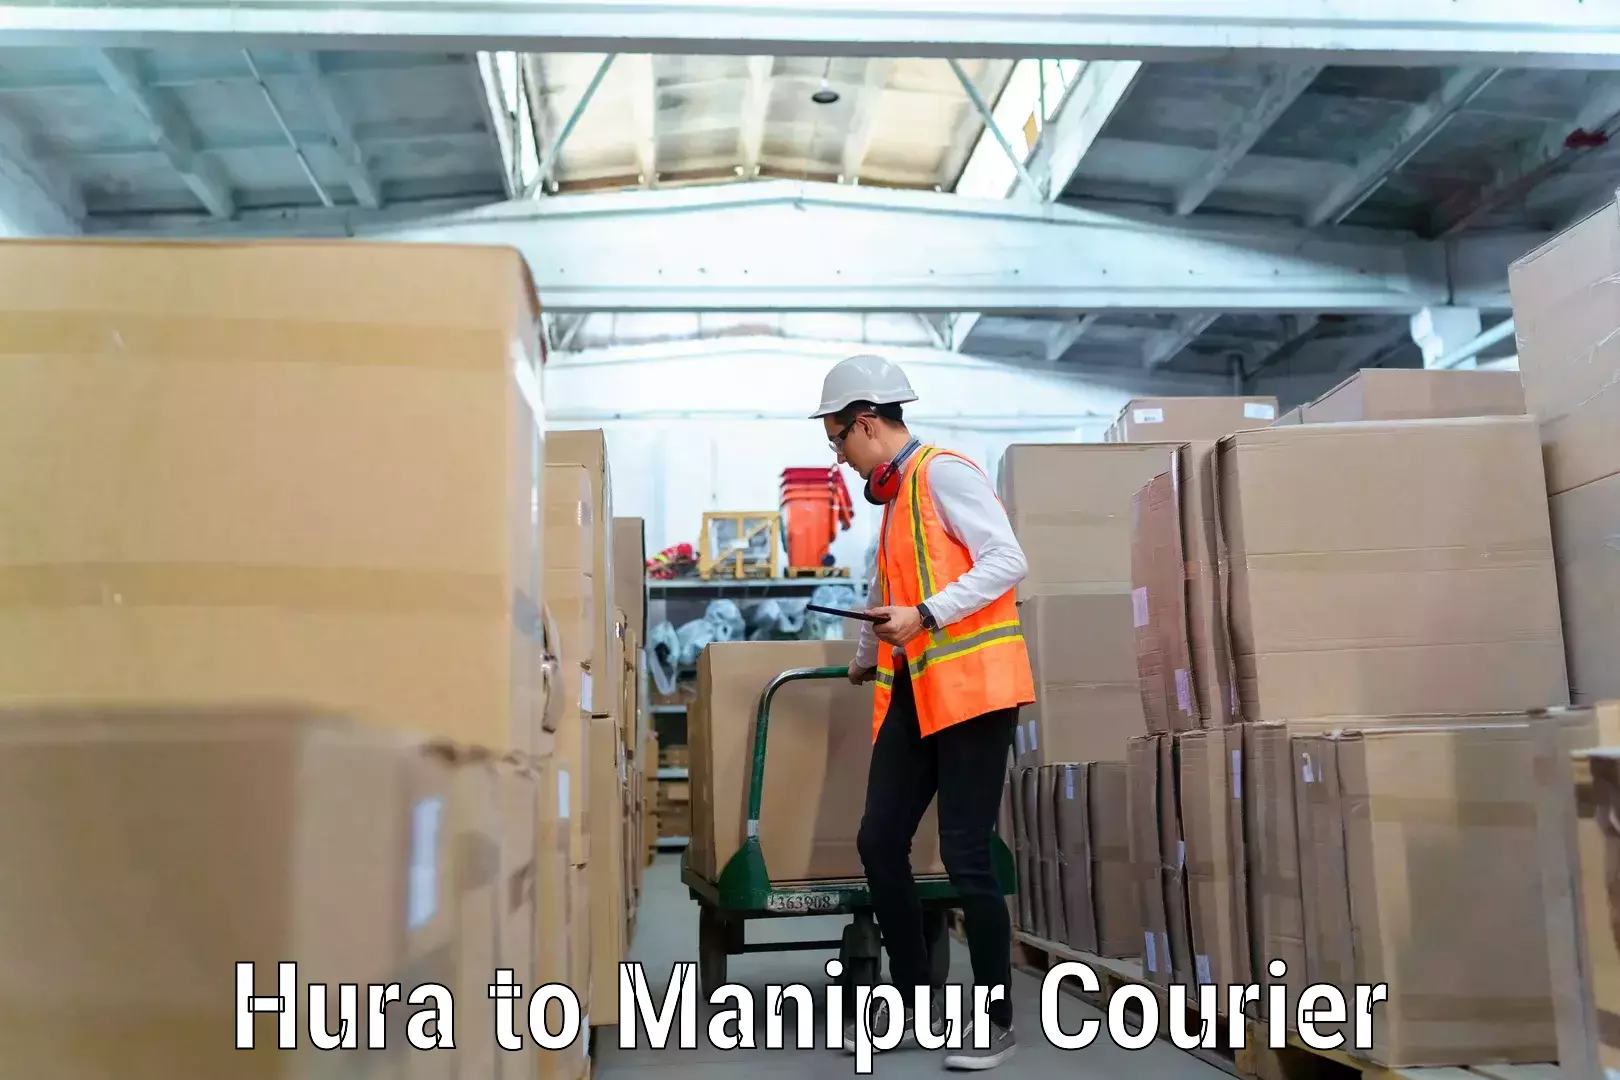 Furniture transport specialists Hura to Manipur